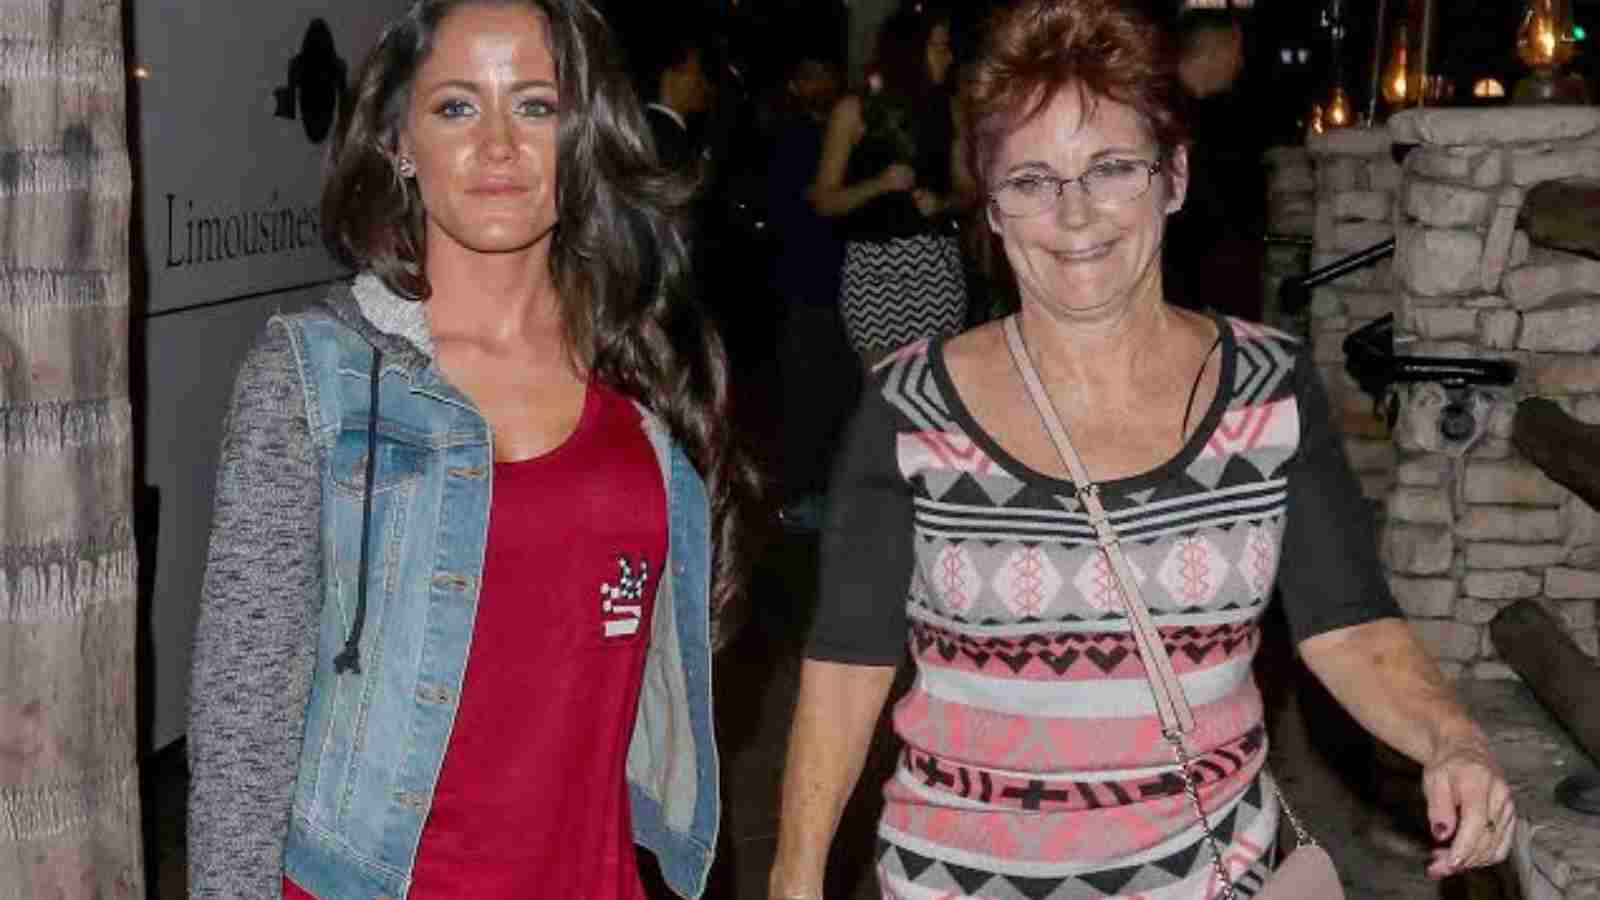 Jenelle Evans and her mother